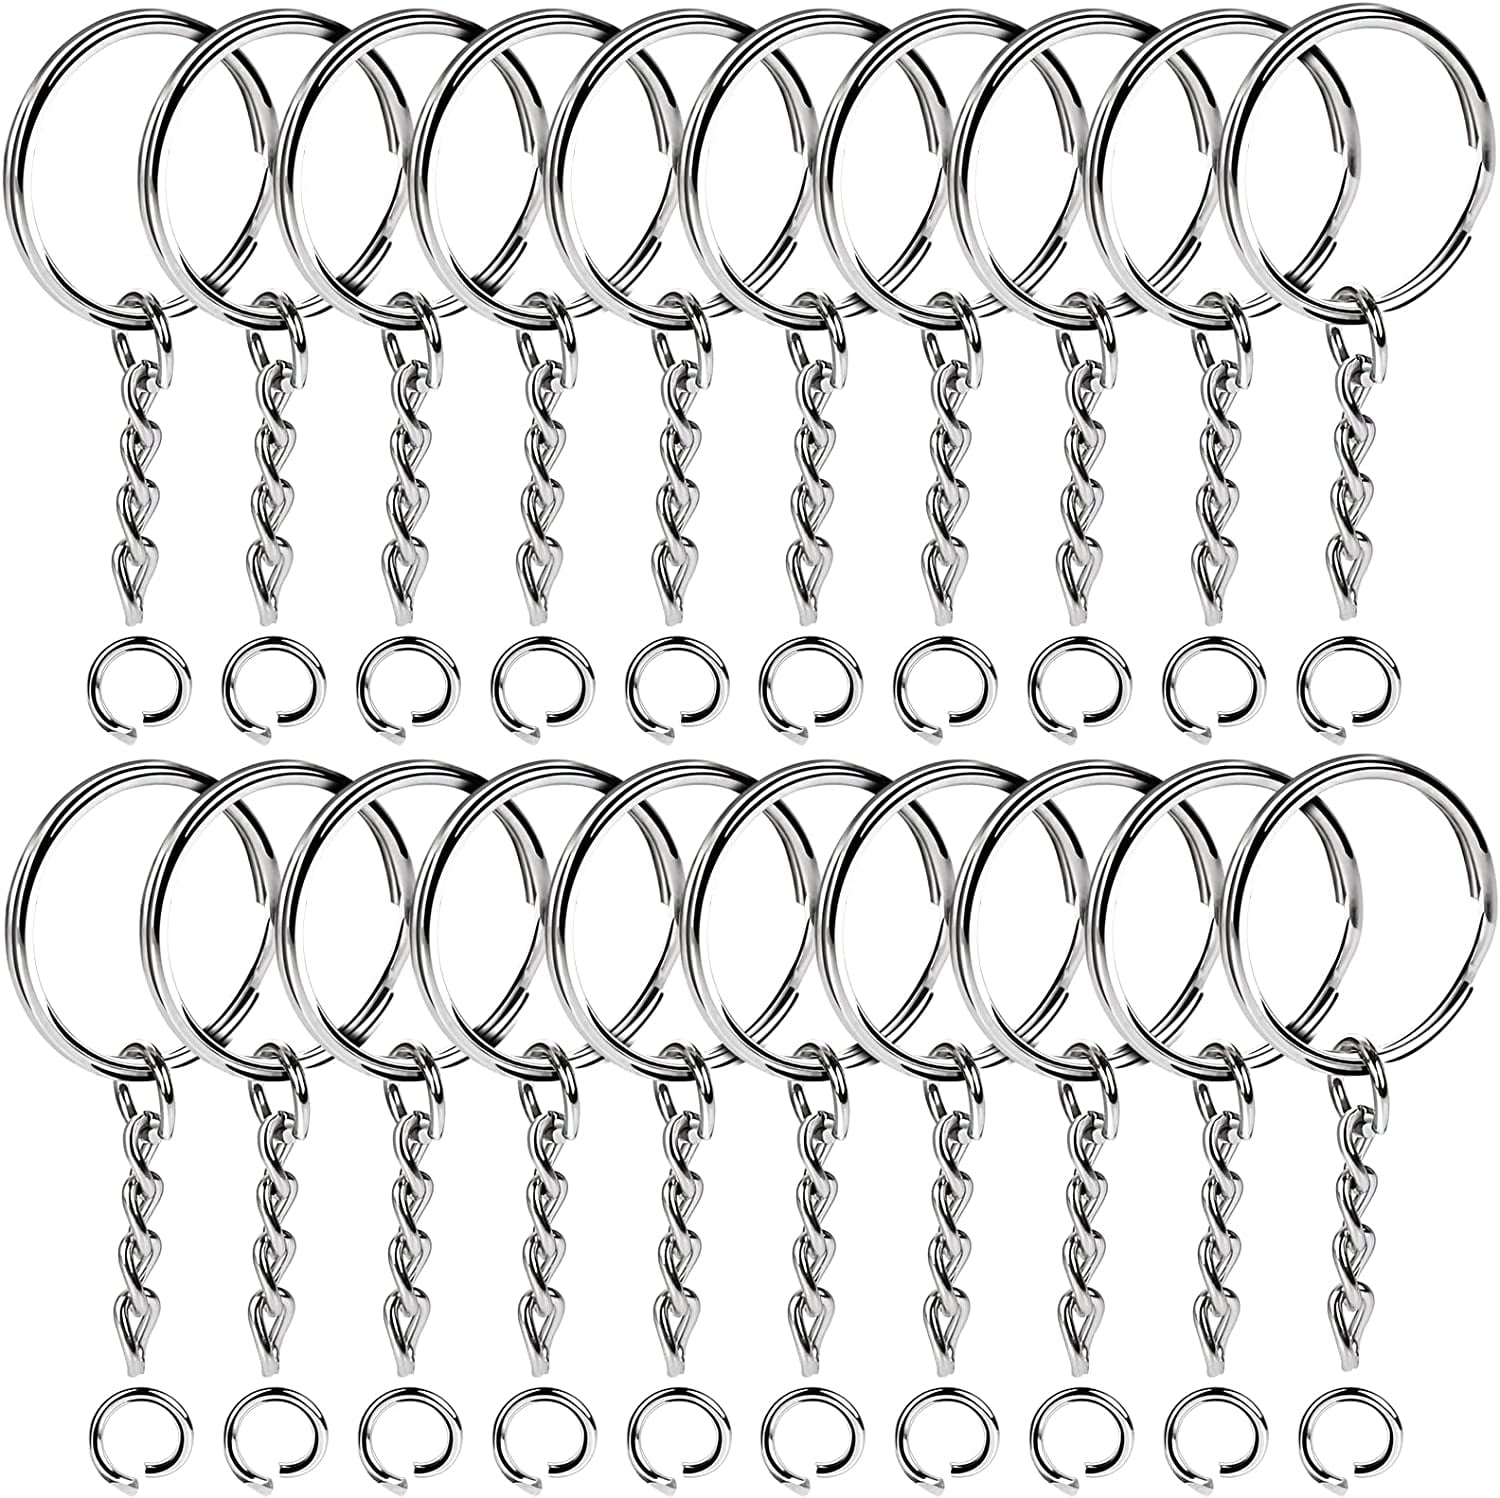 Teenitor Metal Split Key Chain Rings for Arts and Craft- 60 Key Chains 25mm  with 26mm